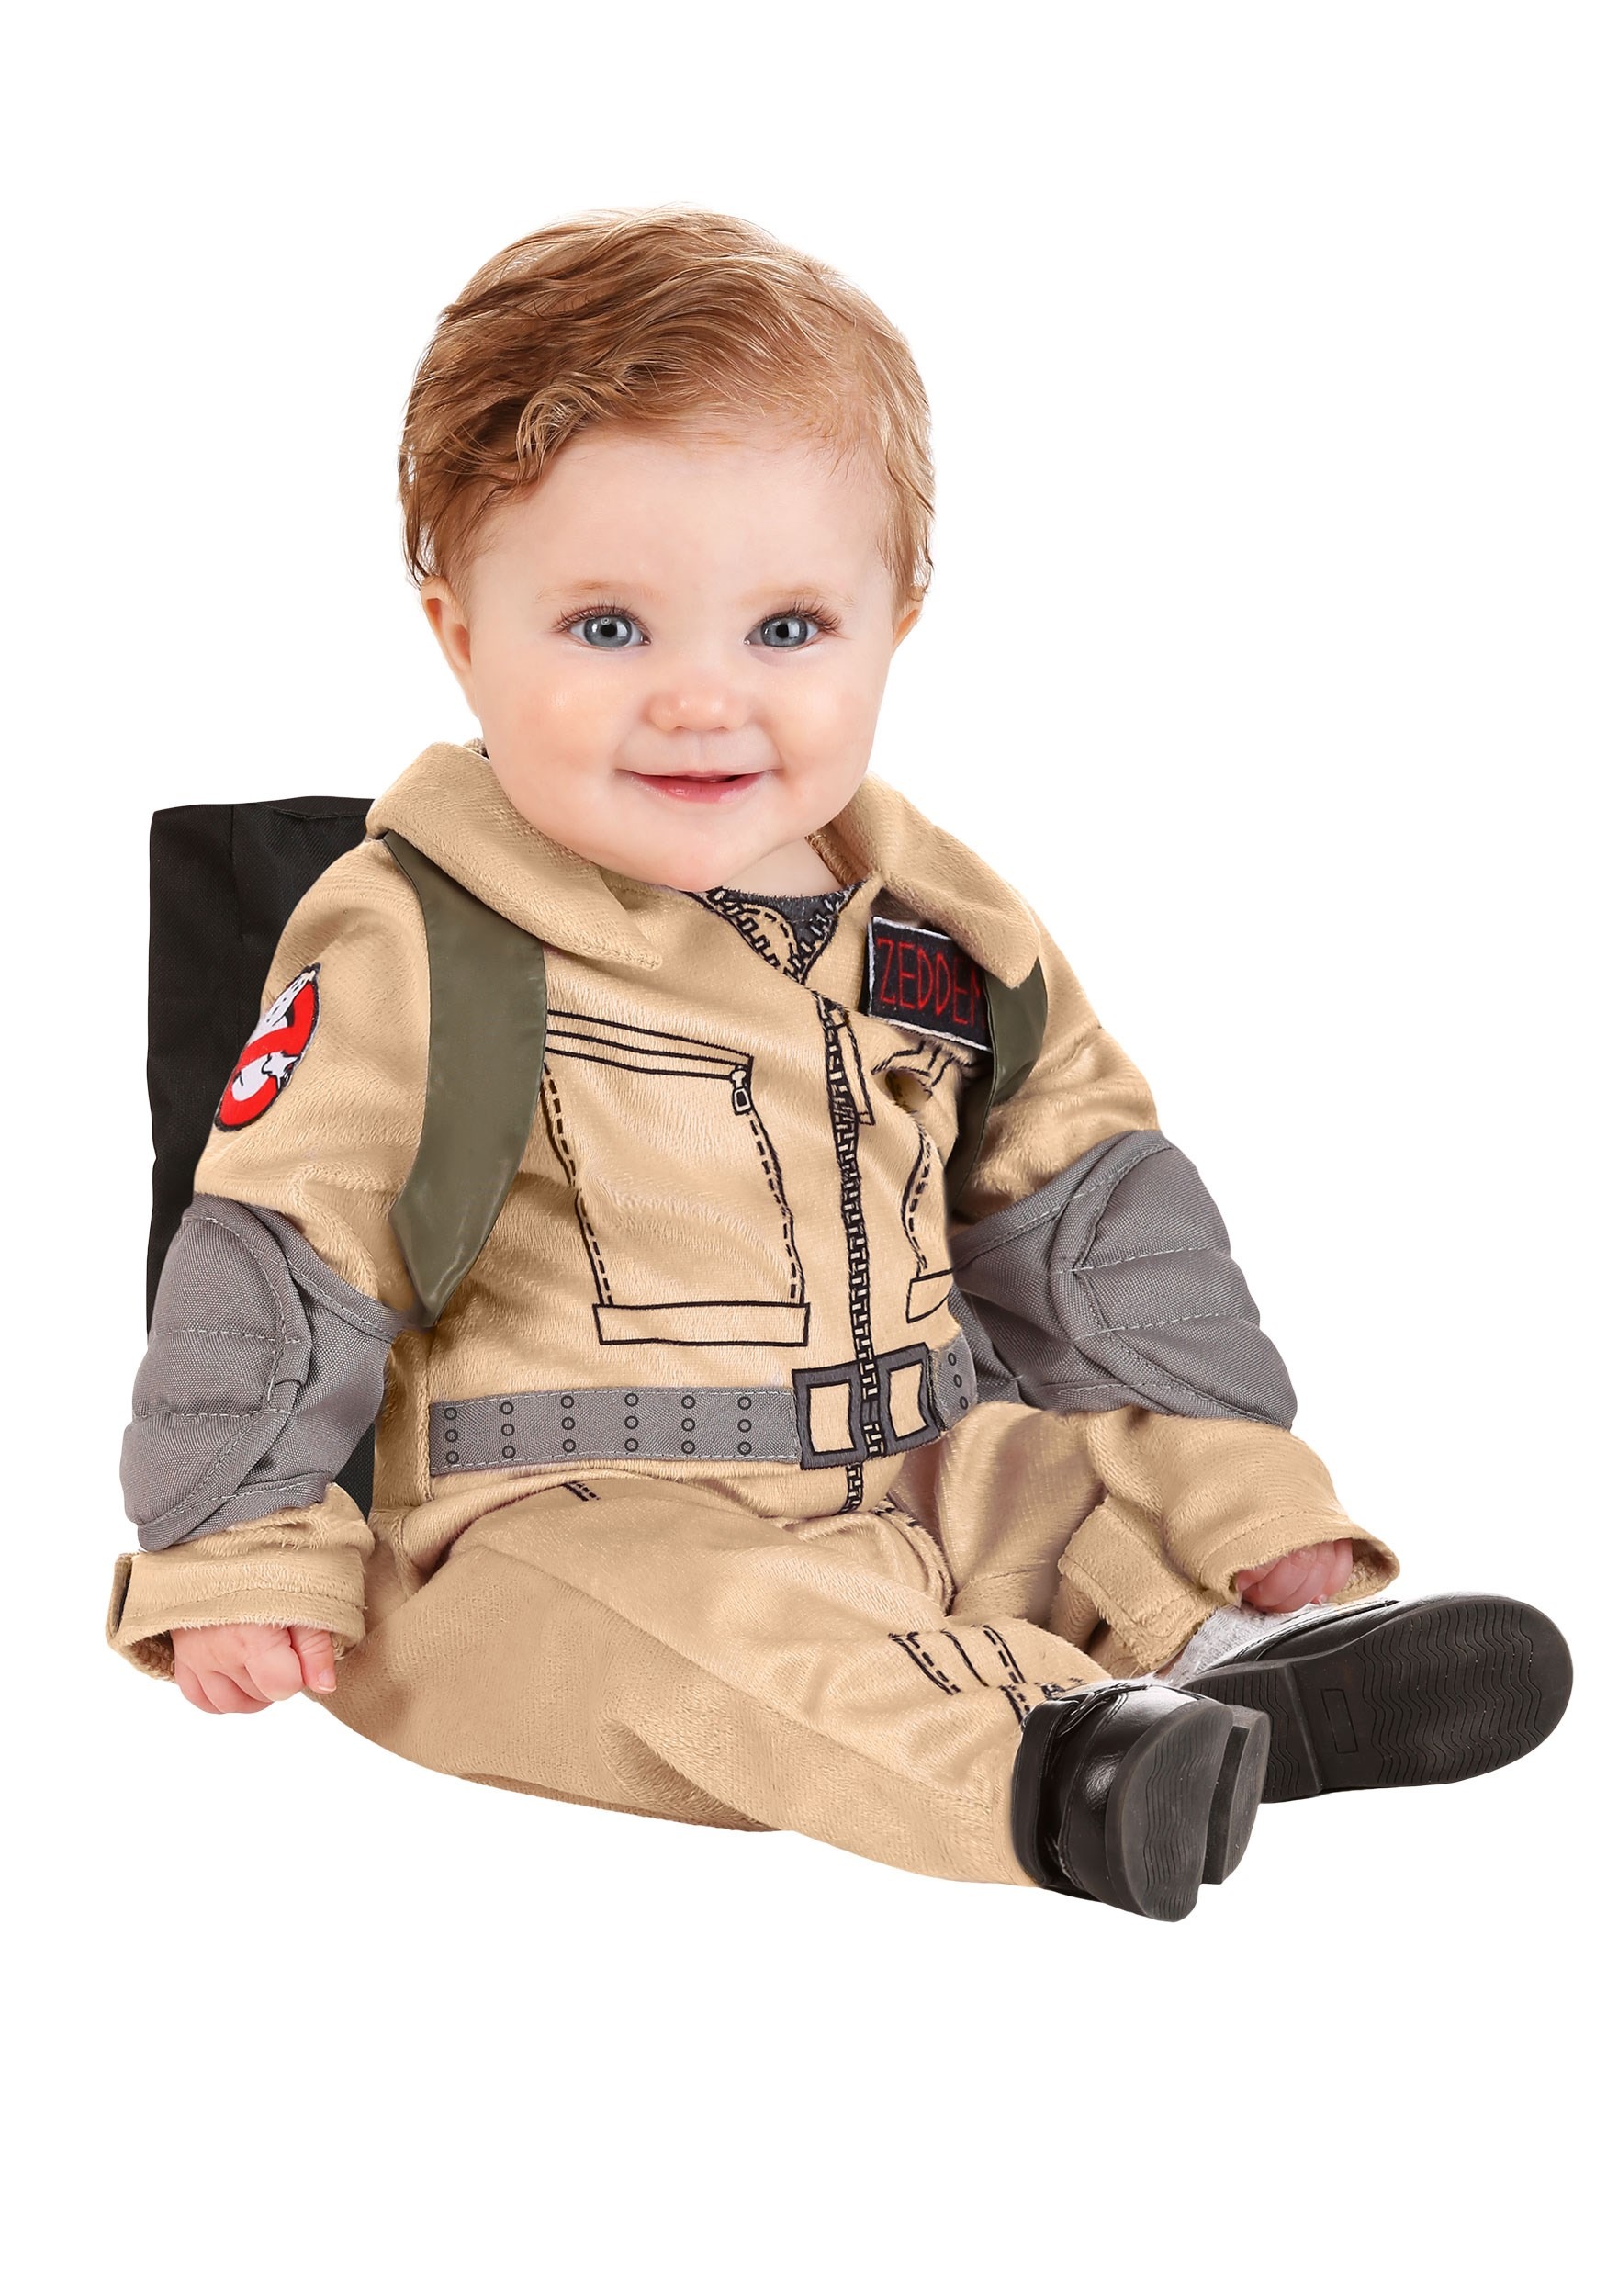 Photos - Fancy Dress Ghostbusters FUN Costumes  Jumpsuit Infant Costume Black/Brown/Red 